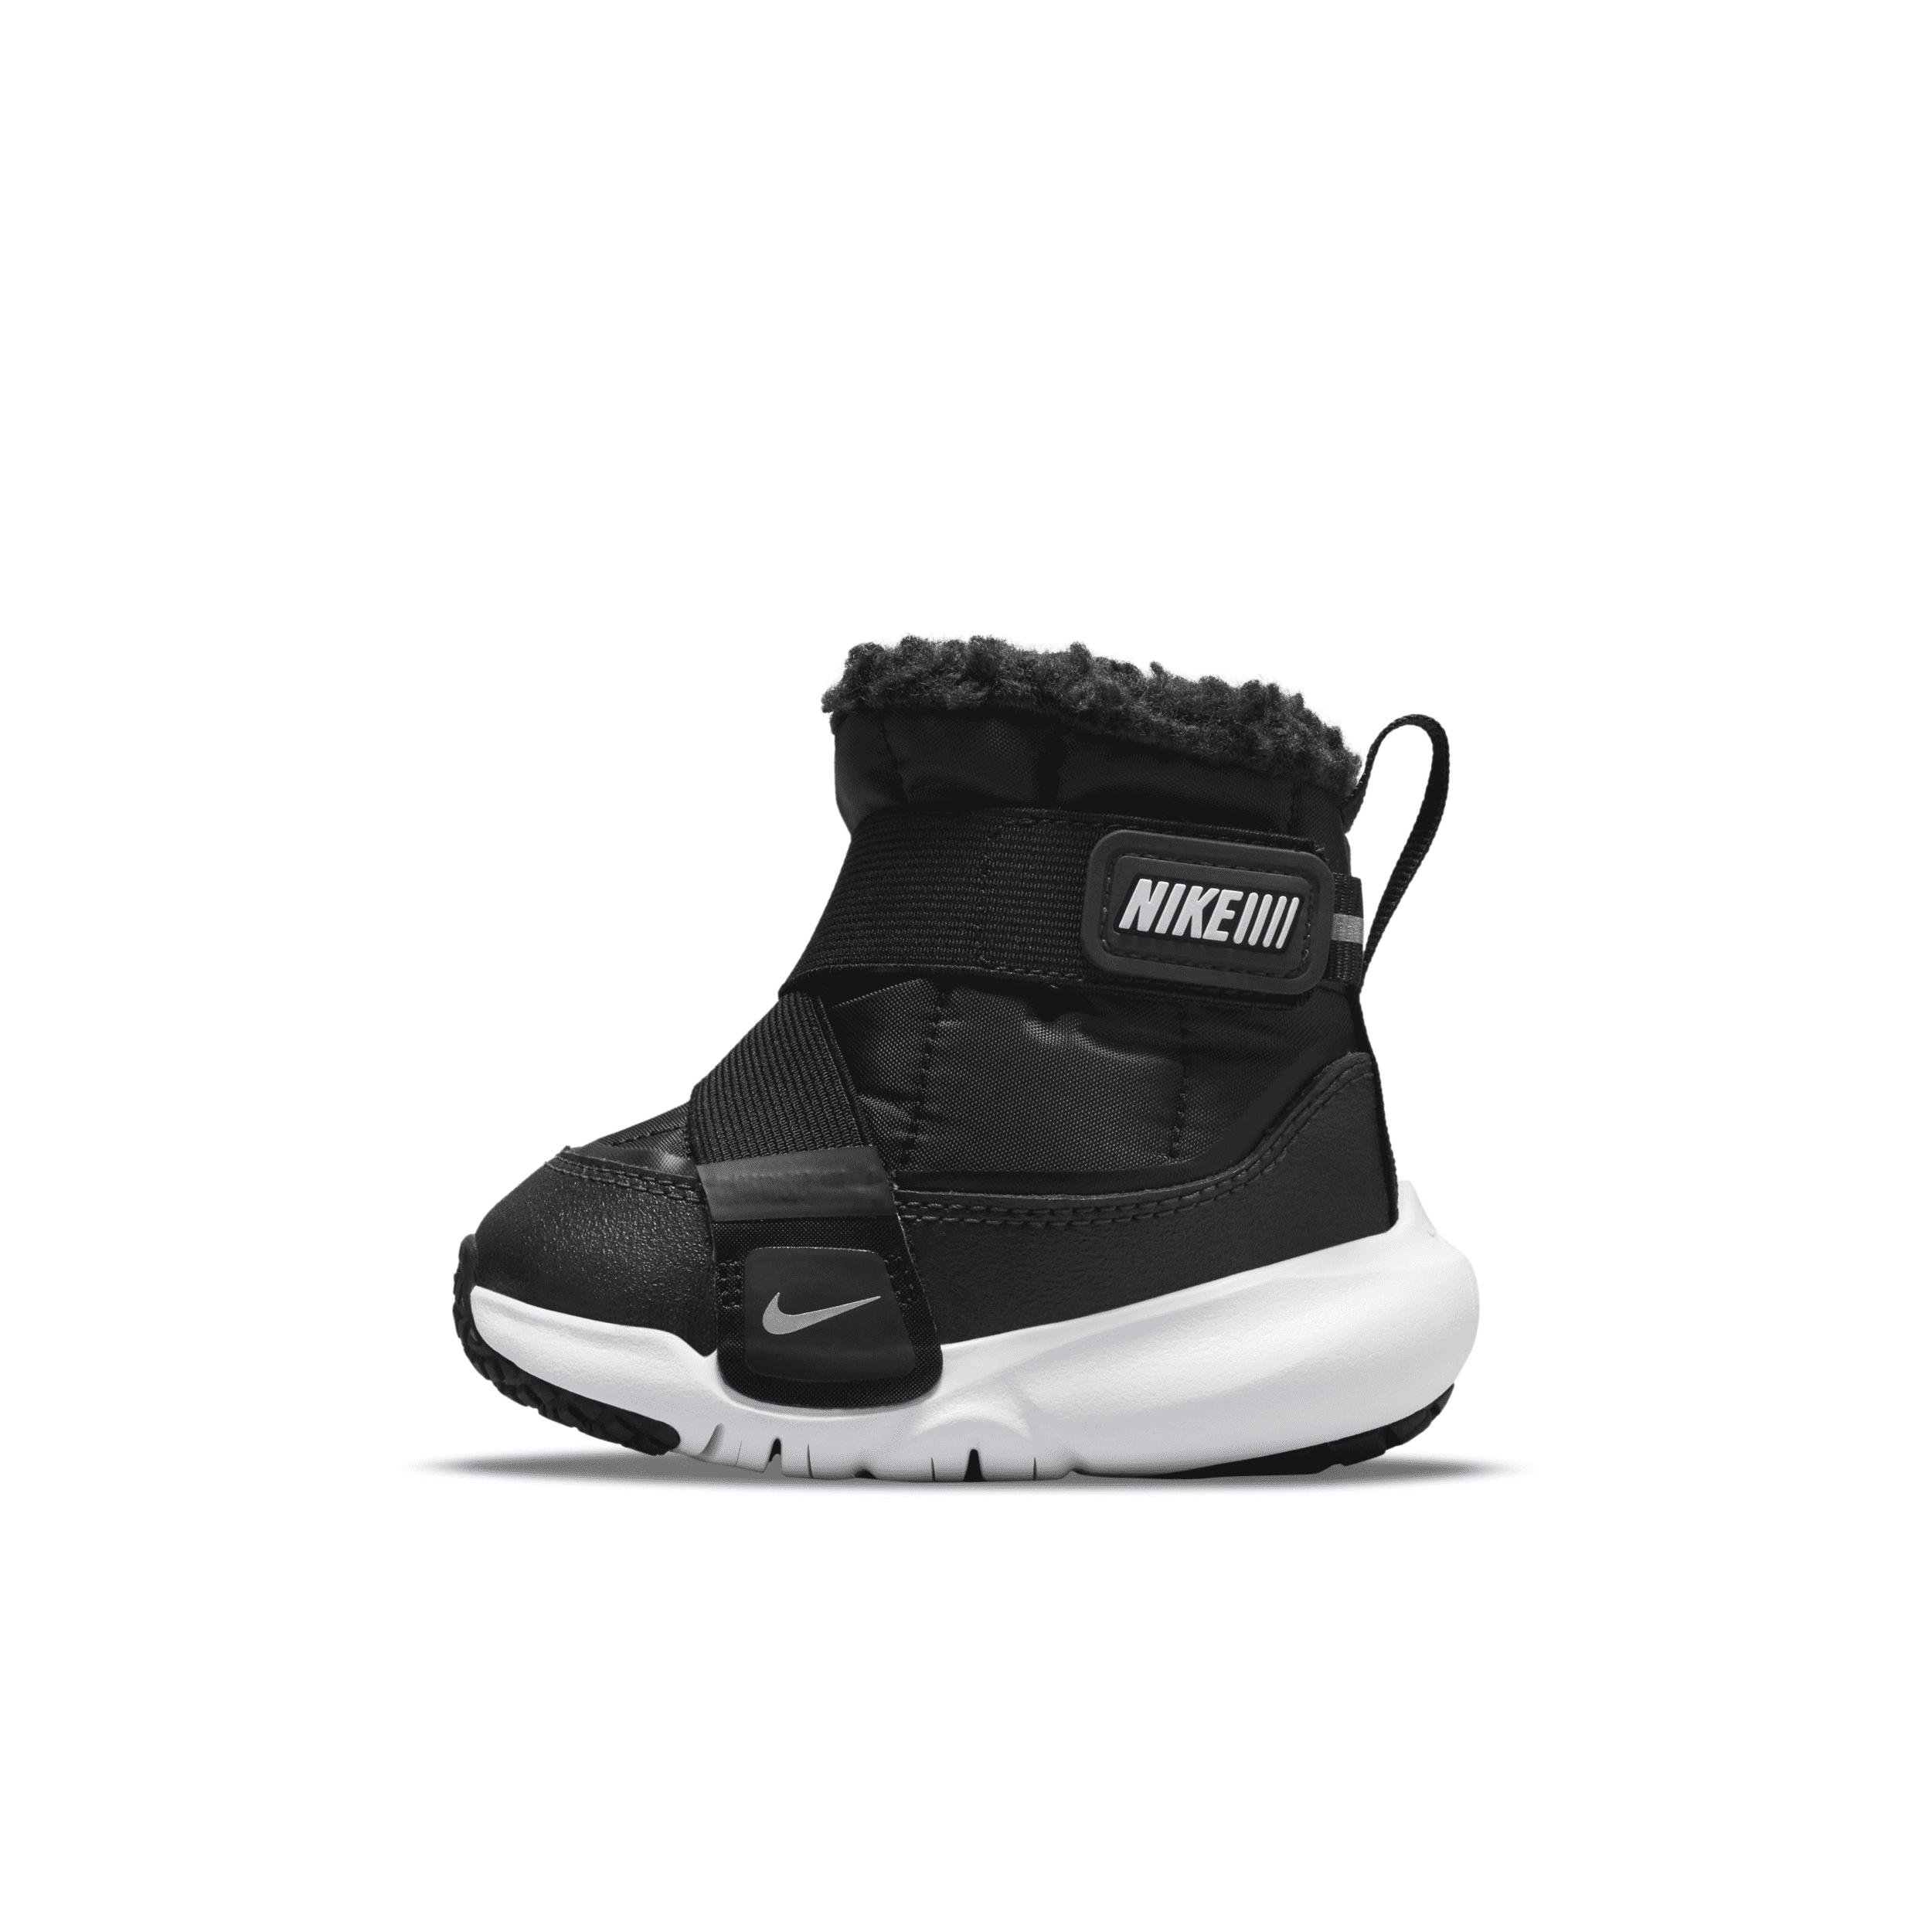 Nike Flex Advance Baby/Toddler Boots by NIKE